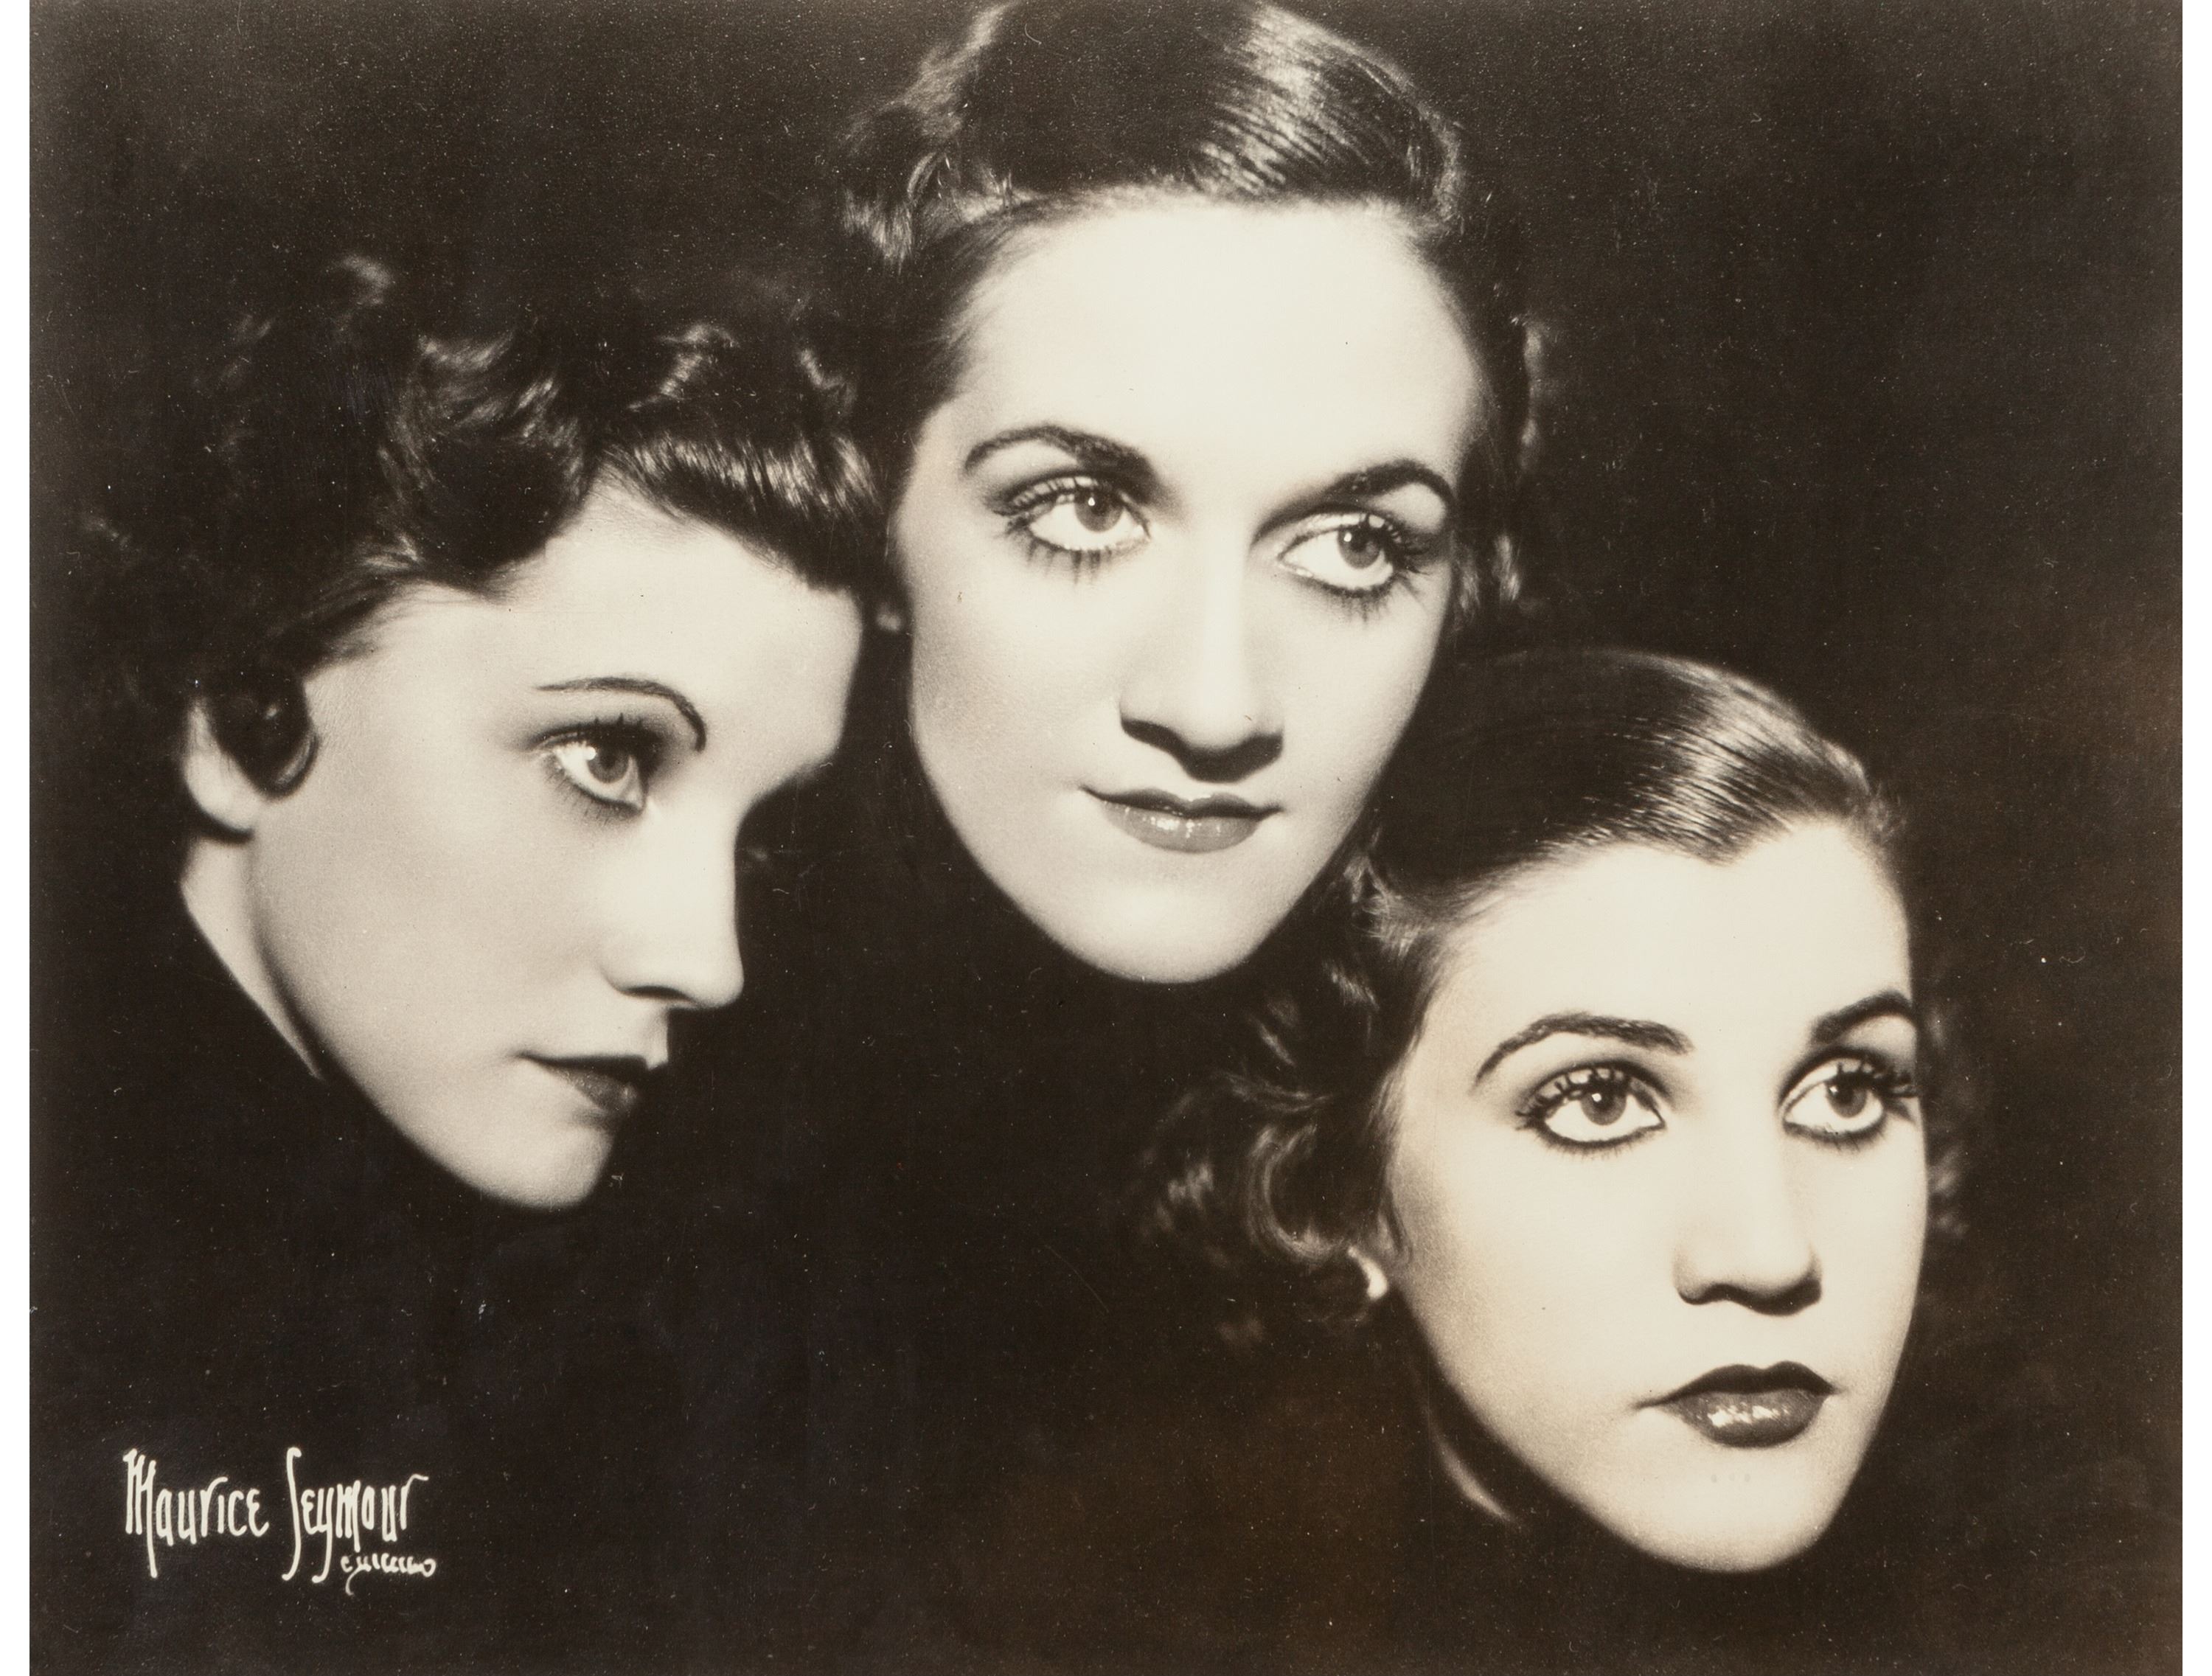 Three Faces, The Andrews Sisters by Maurice Seymour, circa mid-1930s